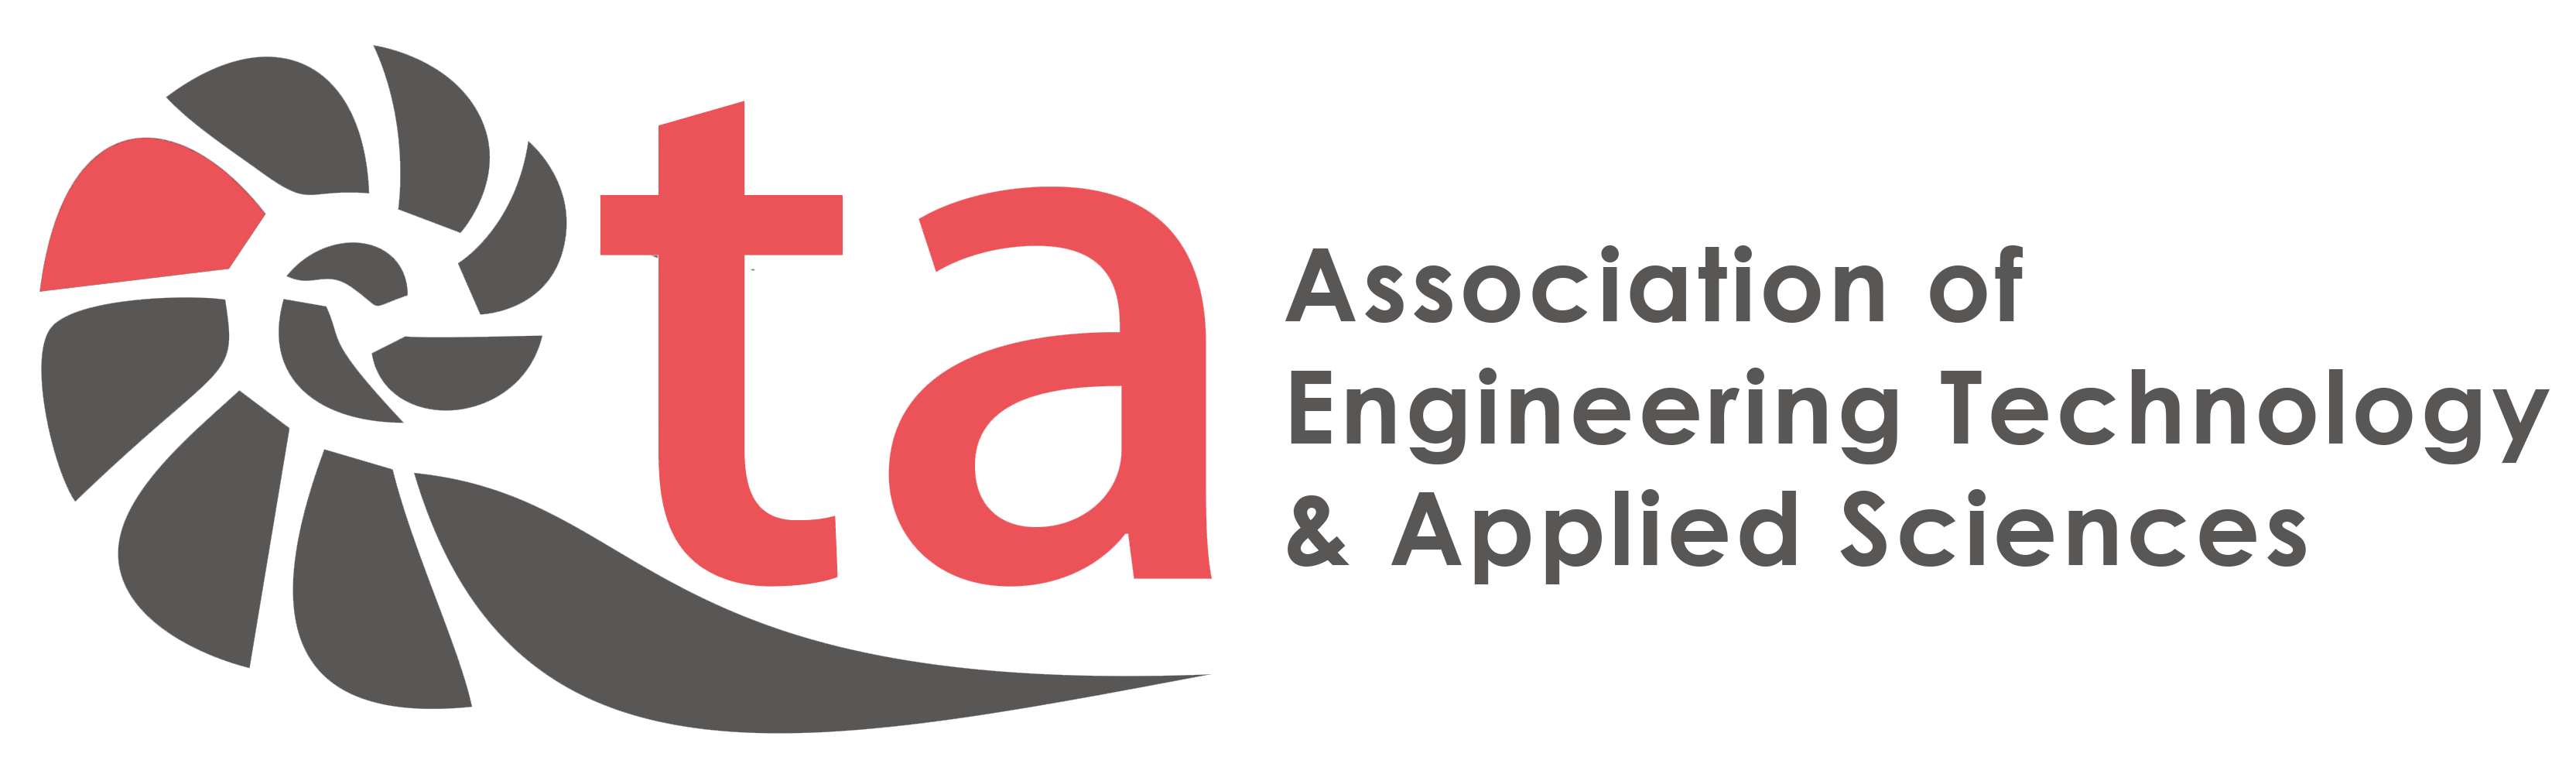 AETA International Conference on Research in Engineering, Information Technology, Business Design, Applied Sciences & Solar Technology  (ITAS)